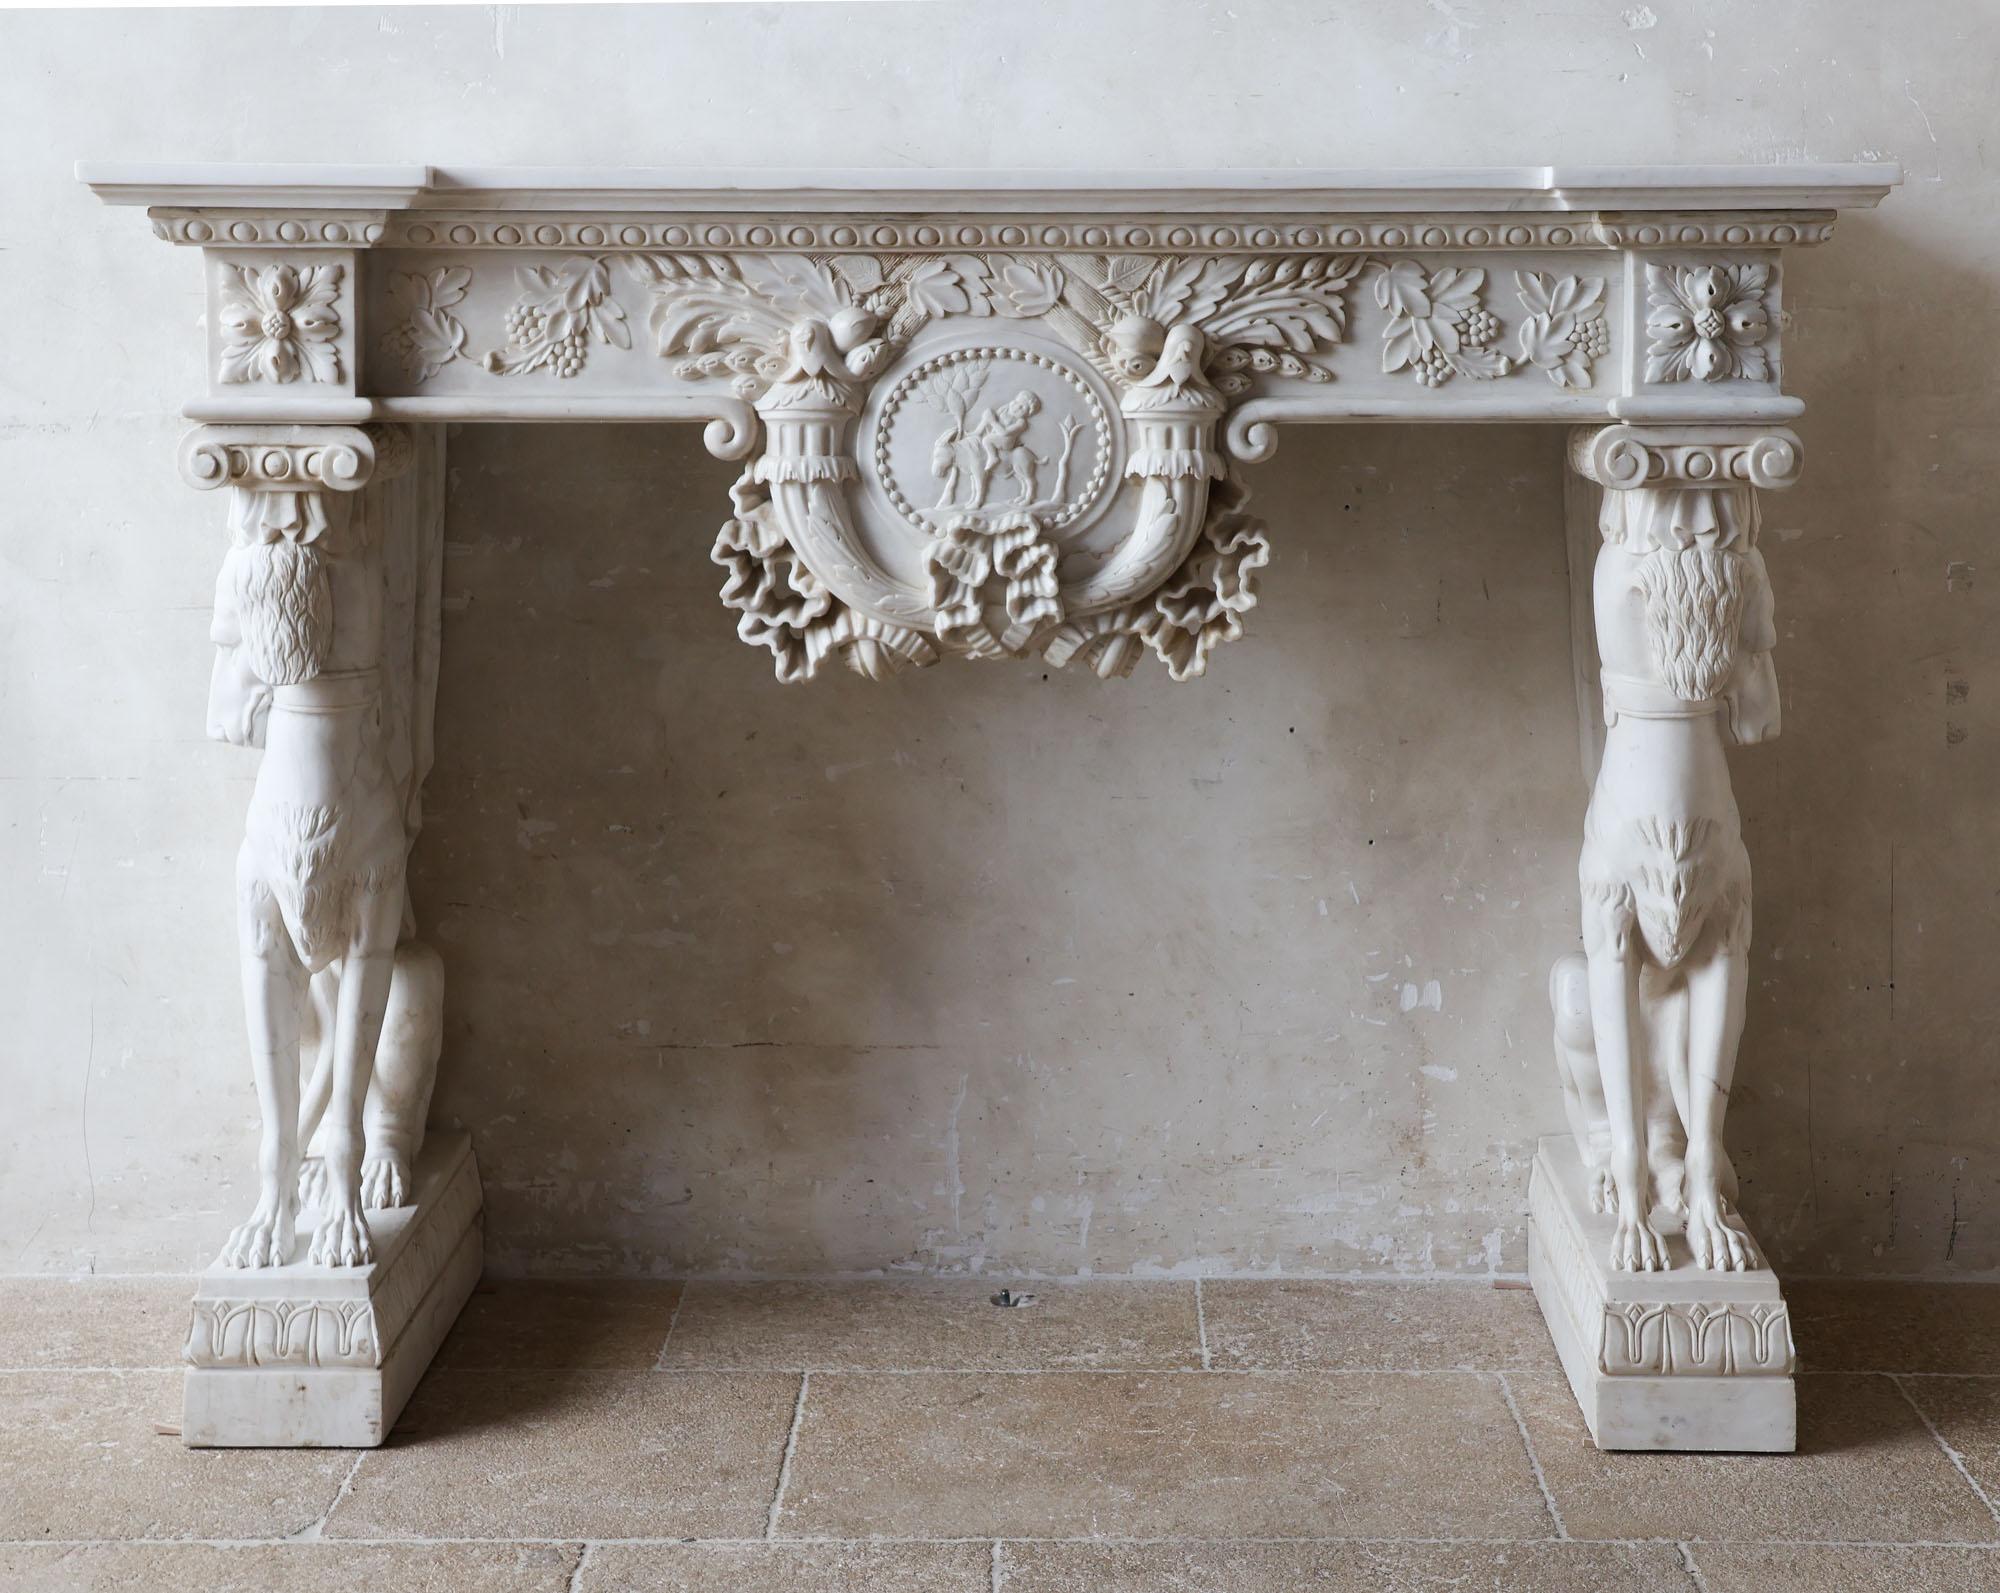 A Rich and Ornate Monumental Mantelpiece Italian Renaissance Revival Style In Good Condition For Sale In Baambrugge, NL